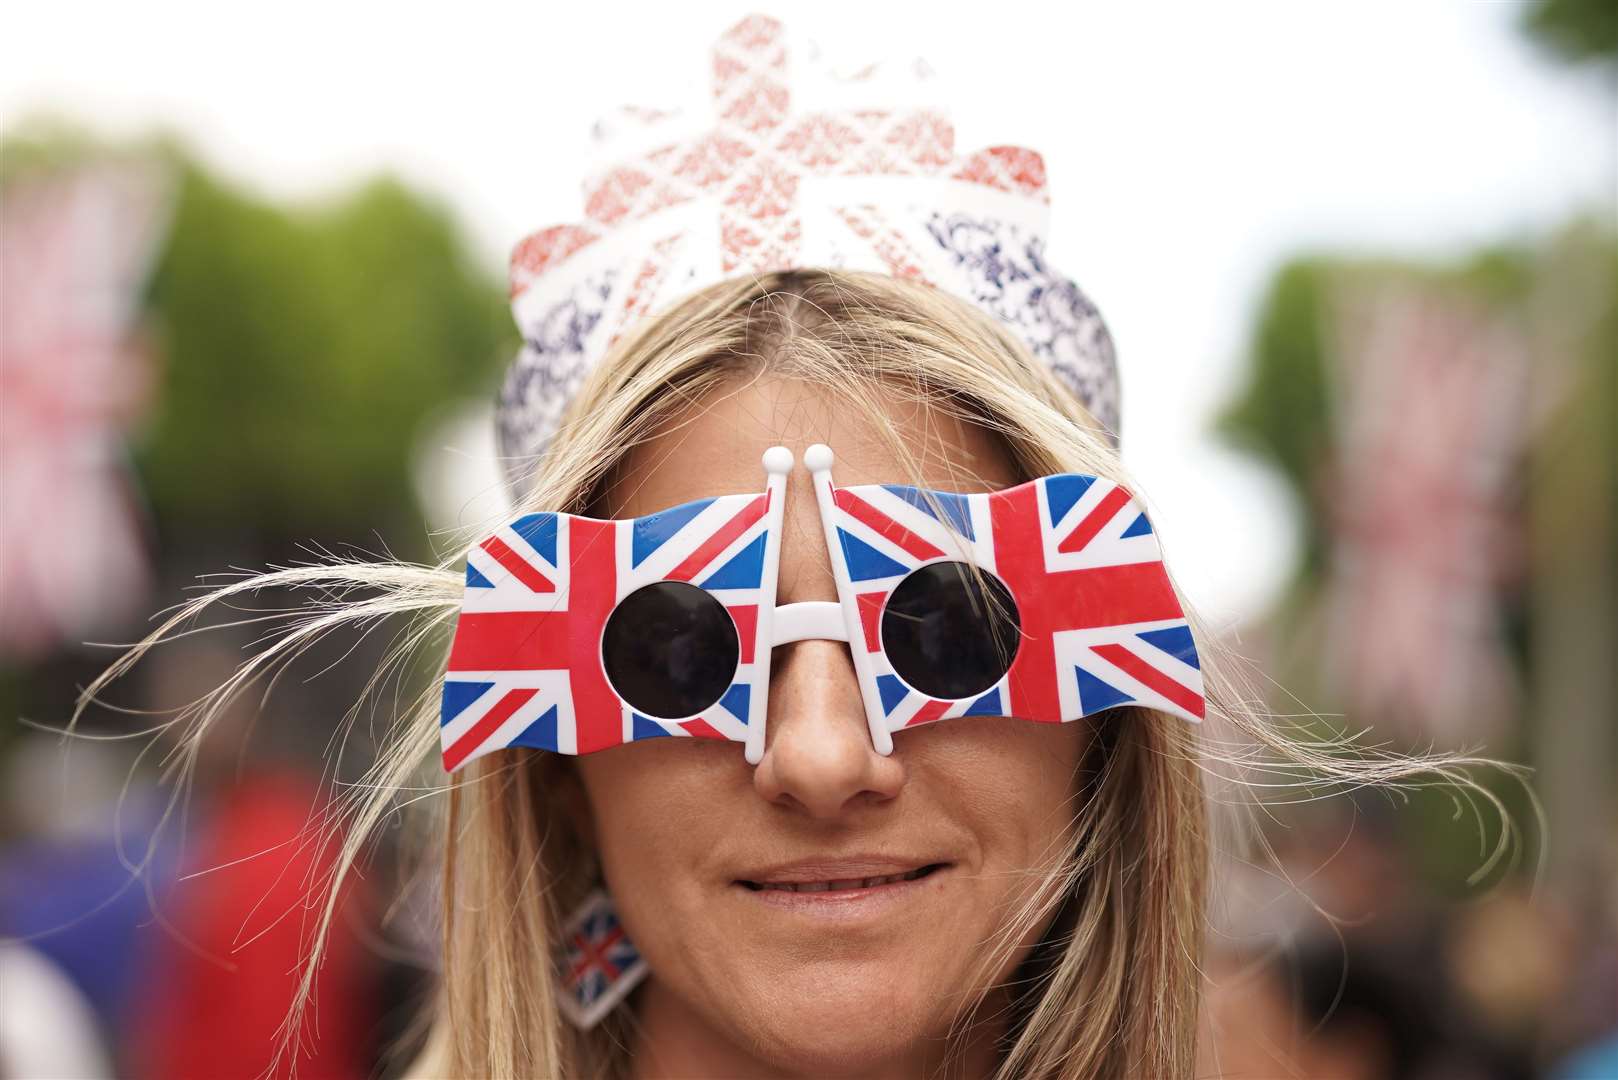 Union Jack outfits featured heavily at the Platinum Party at the Palace (Aaron Chown/PA)